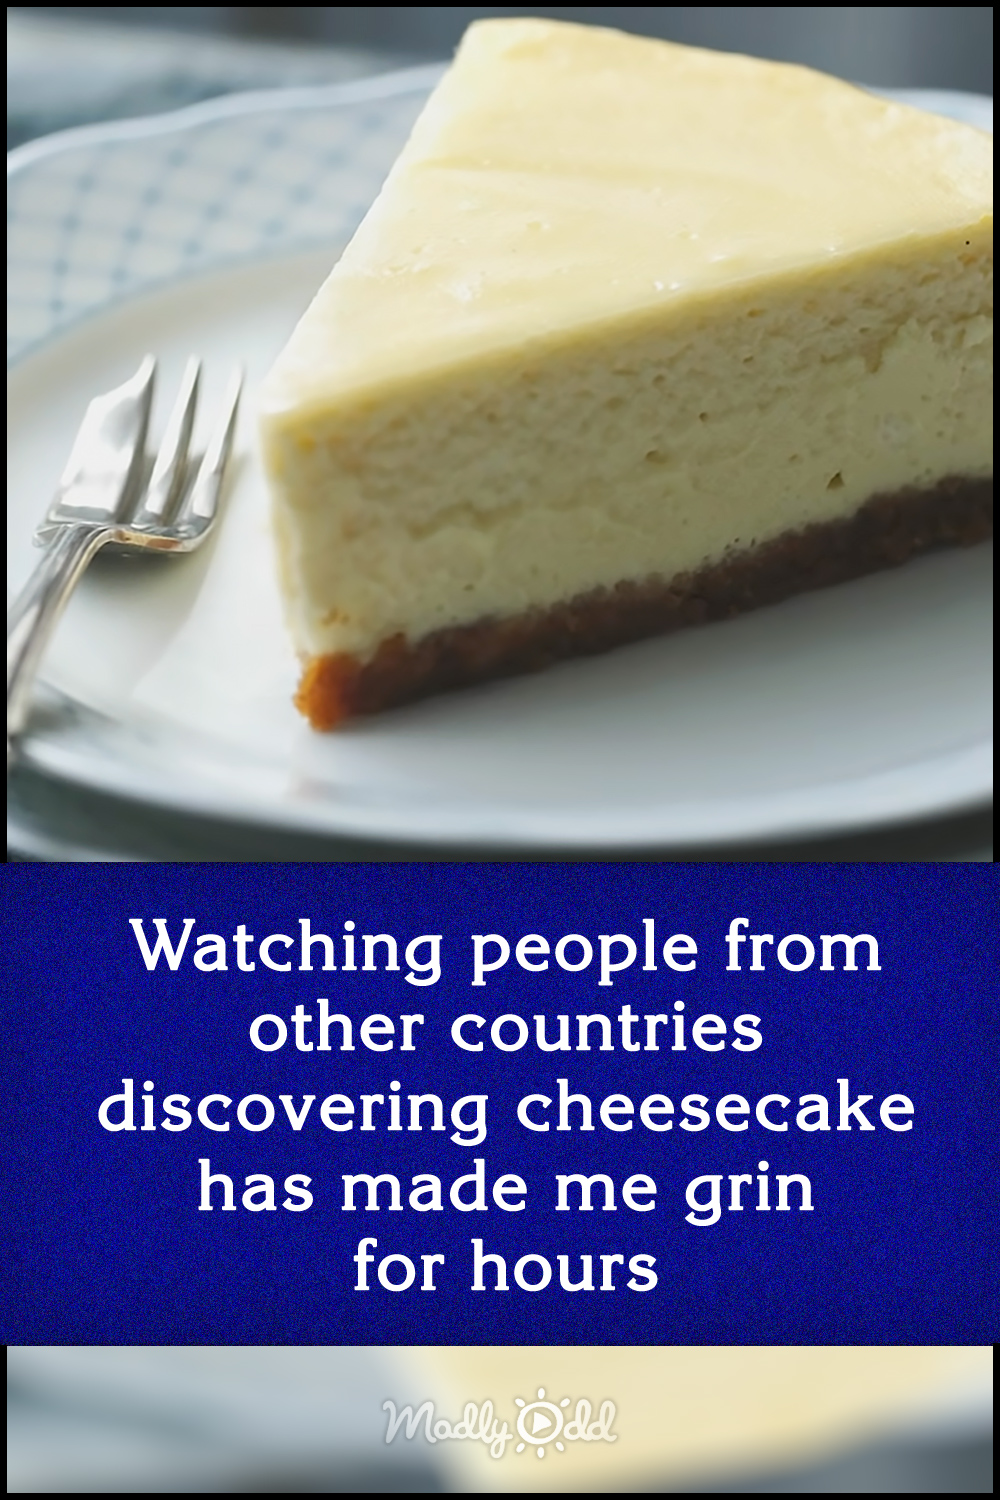 Watching people from other countries discovering cheesecake has made me grin for hours